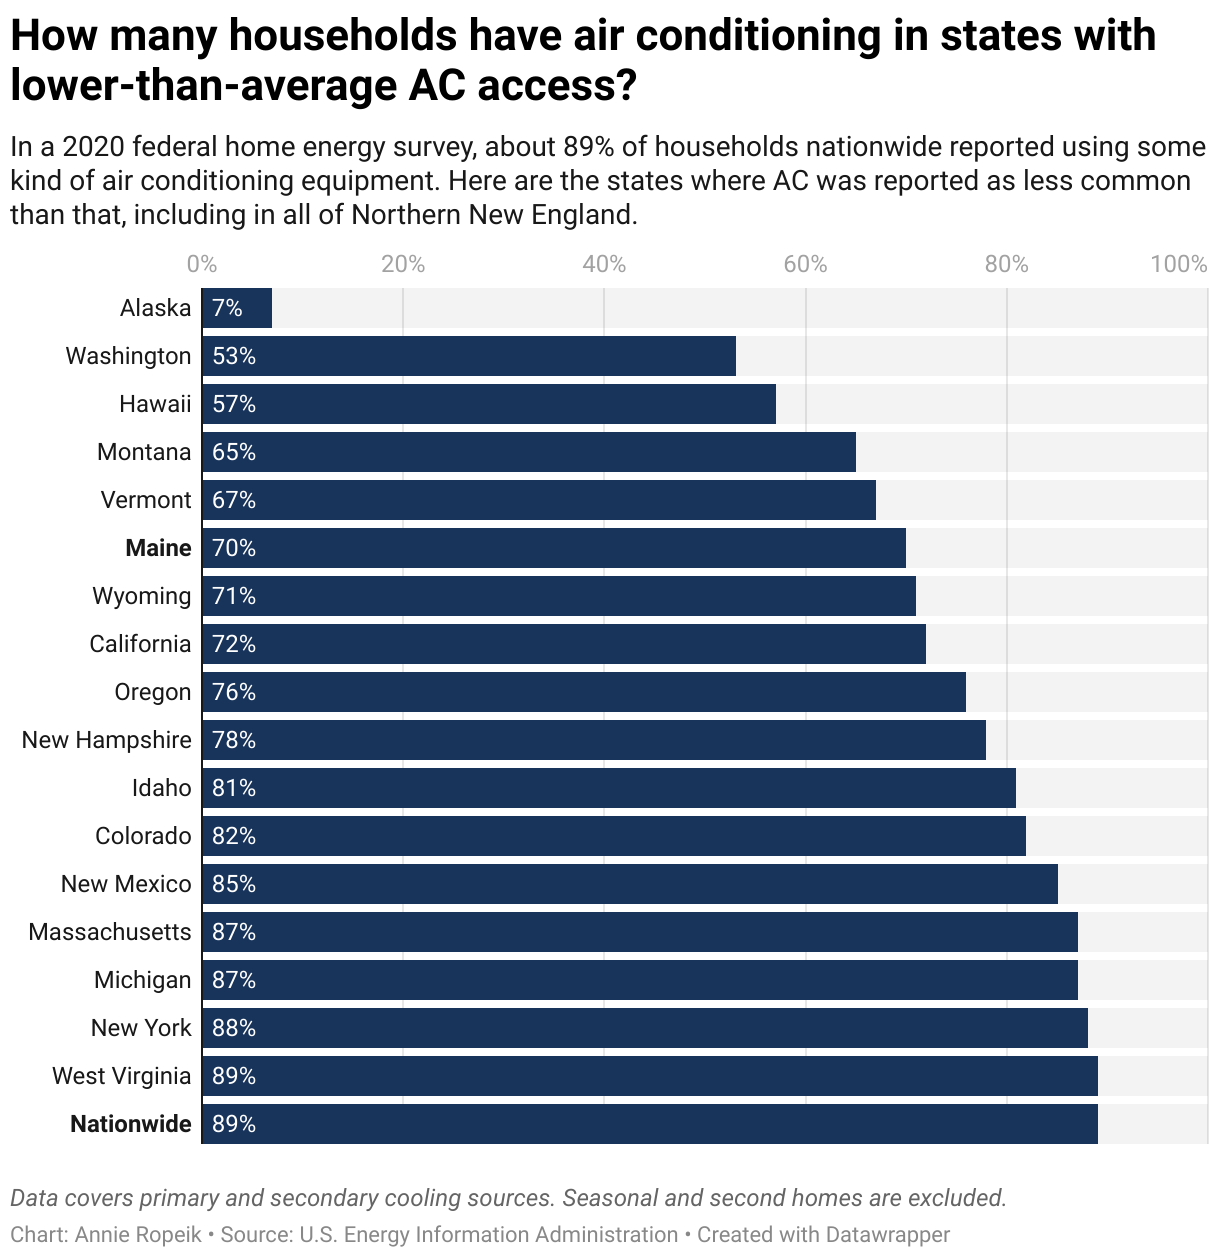 A bar chart shows the states where air conditioning is less common than in the national norm of 88% of households. It shows that Maine has AC in 70% of households. The data is from the 2020 Residential Energy Consumption Survey by the U.S. Energy Information Administration.